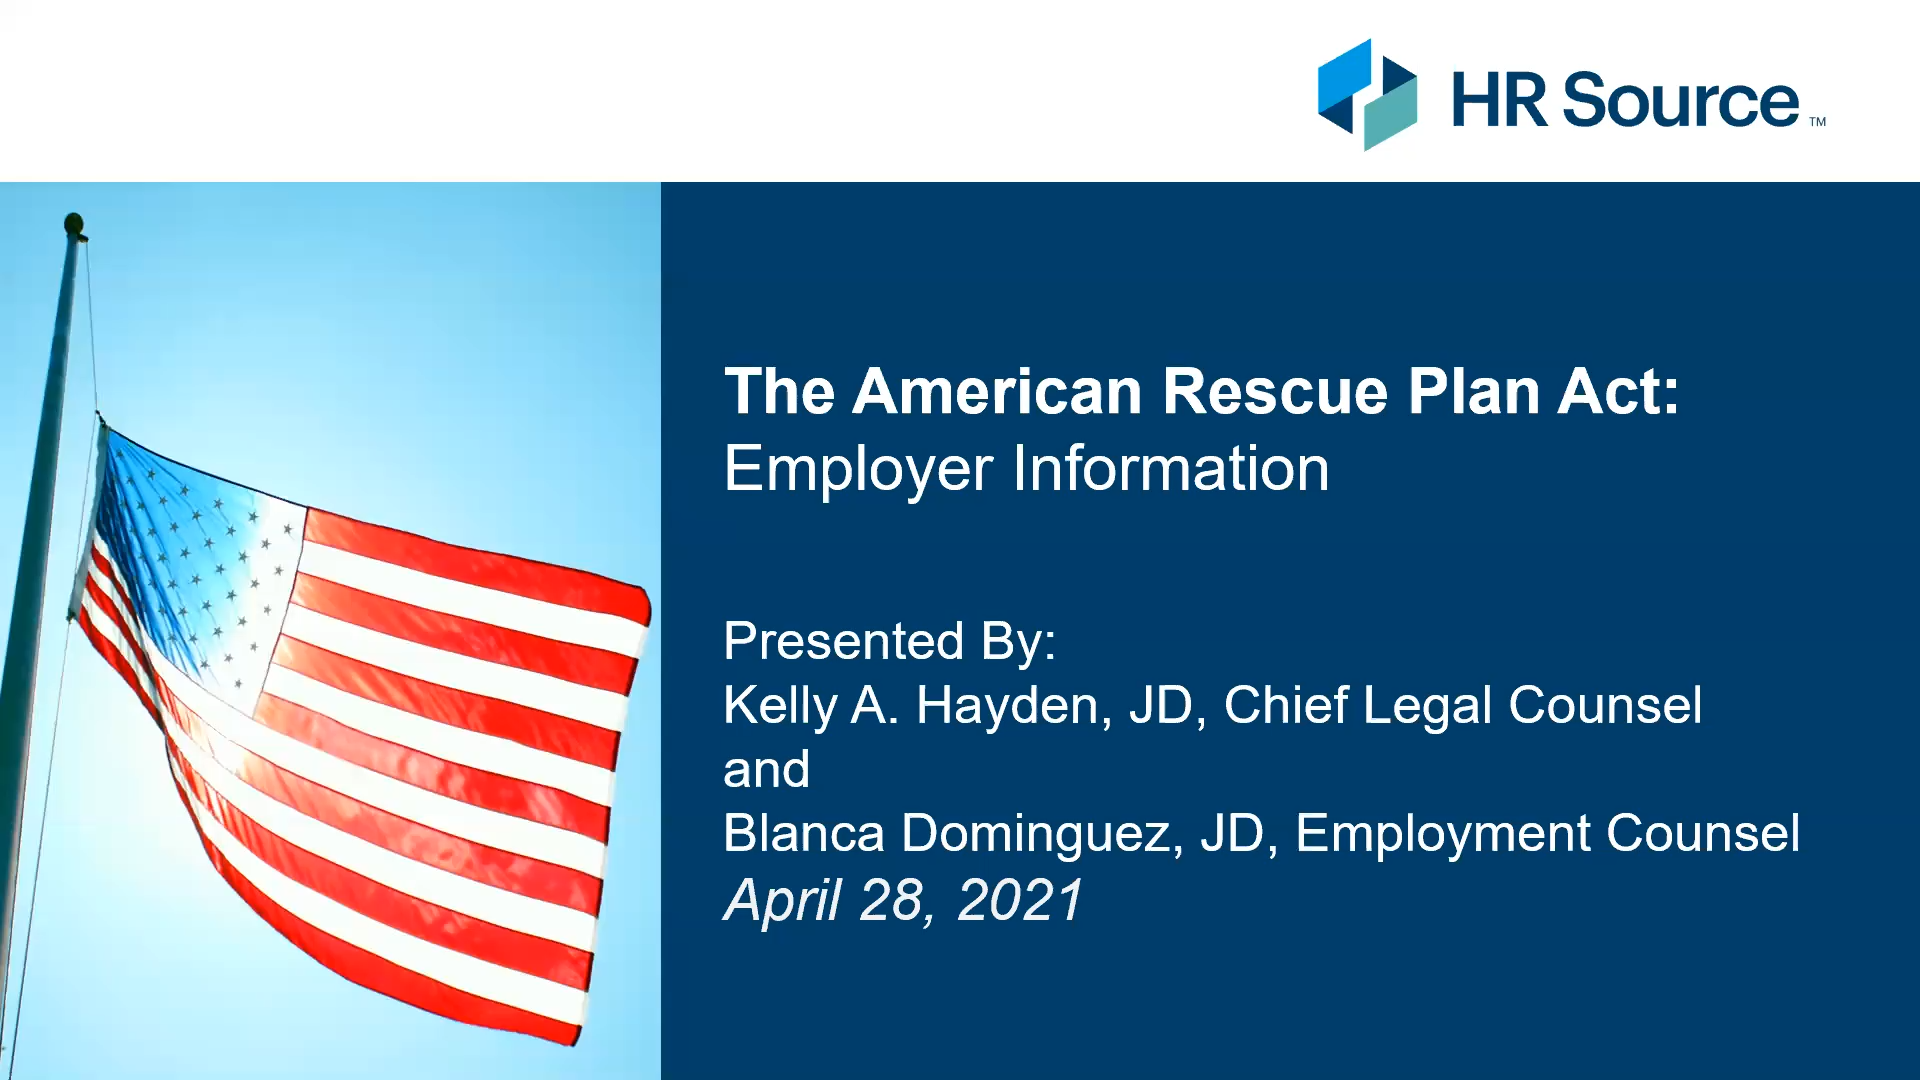 The American Rescue Plan Act: Employer Information